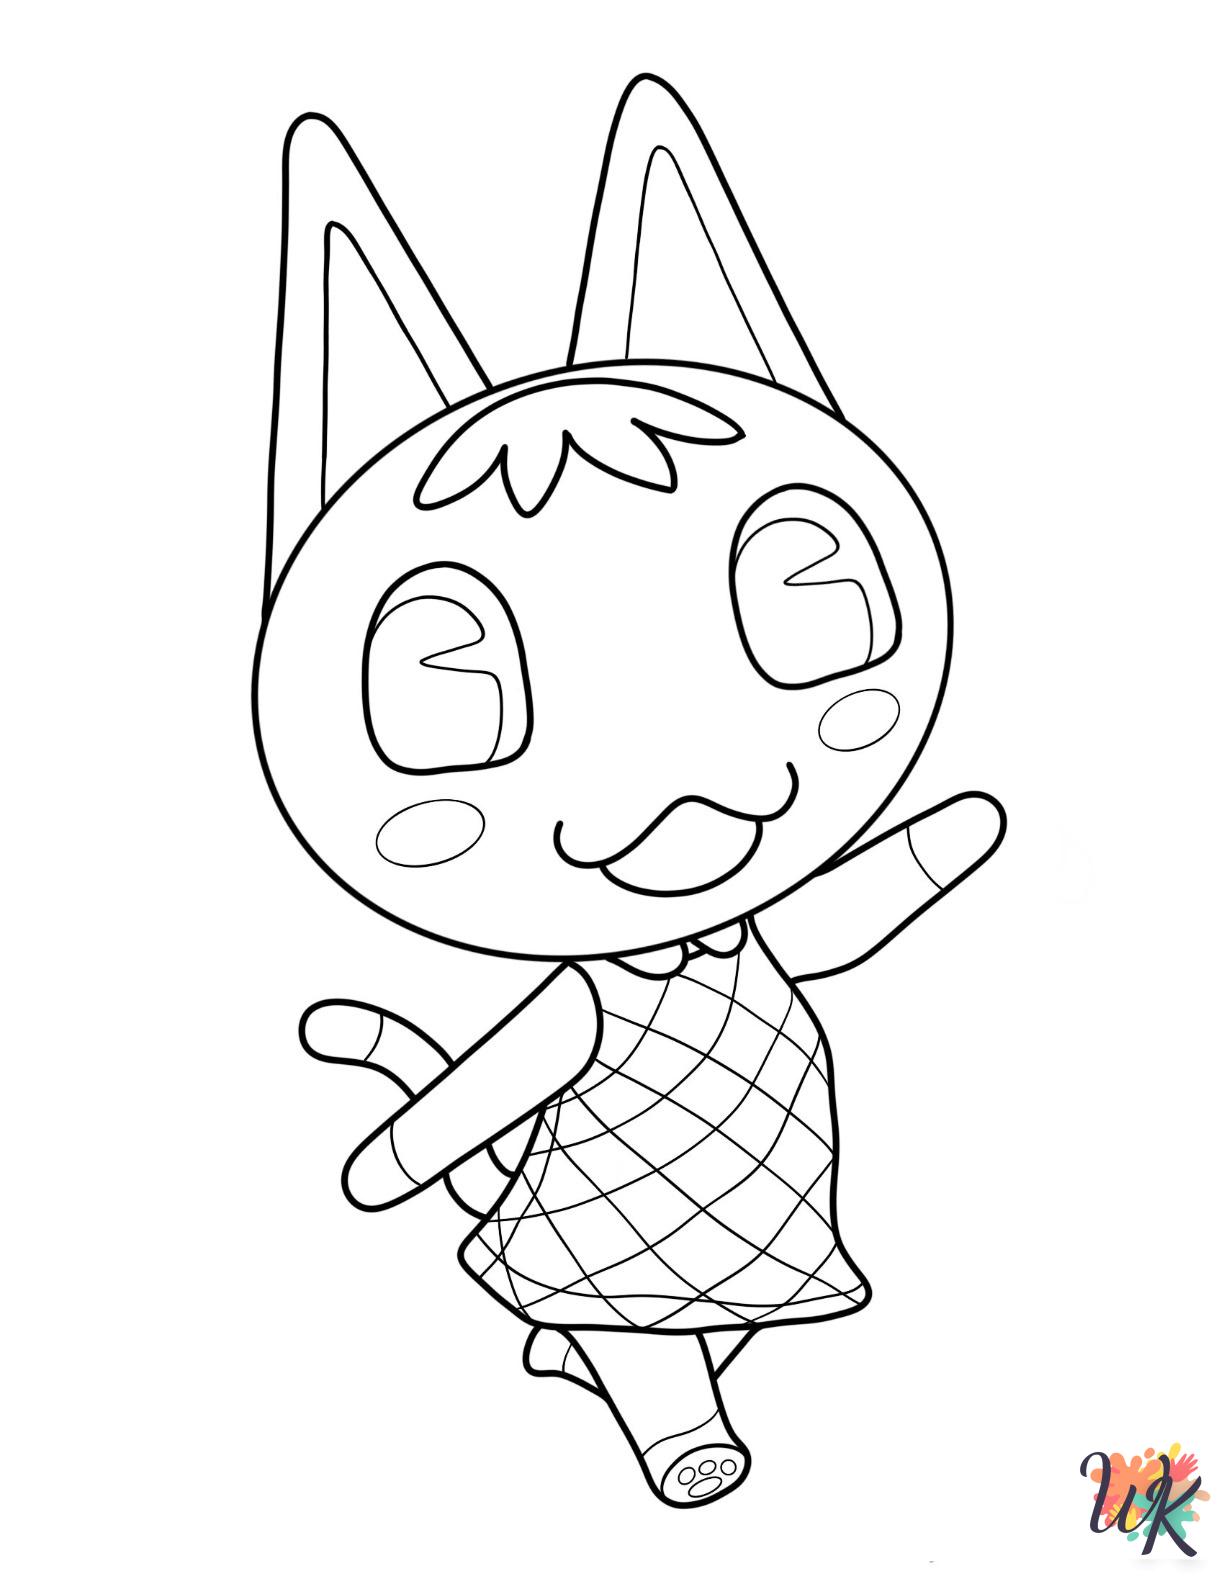 Animal Crossing coloring pages 1